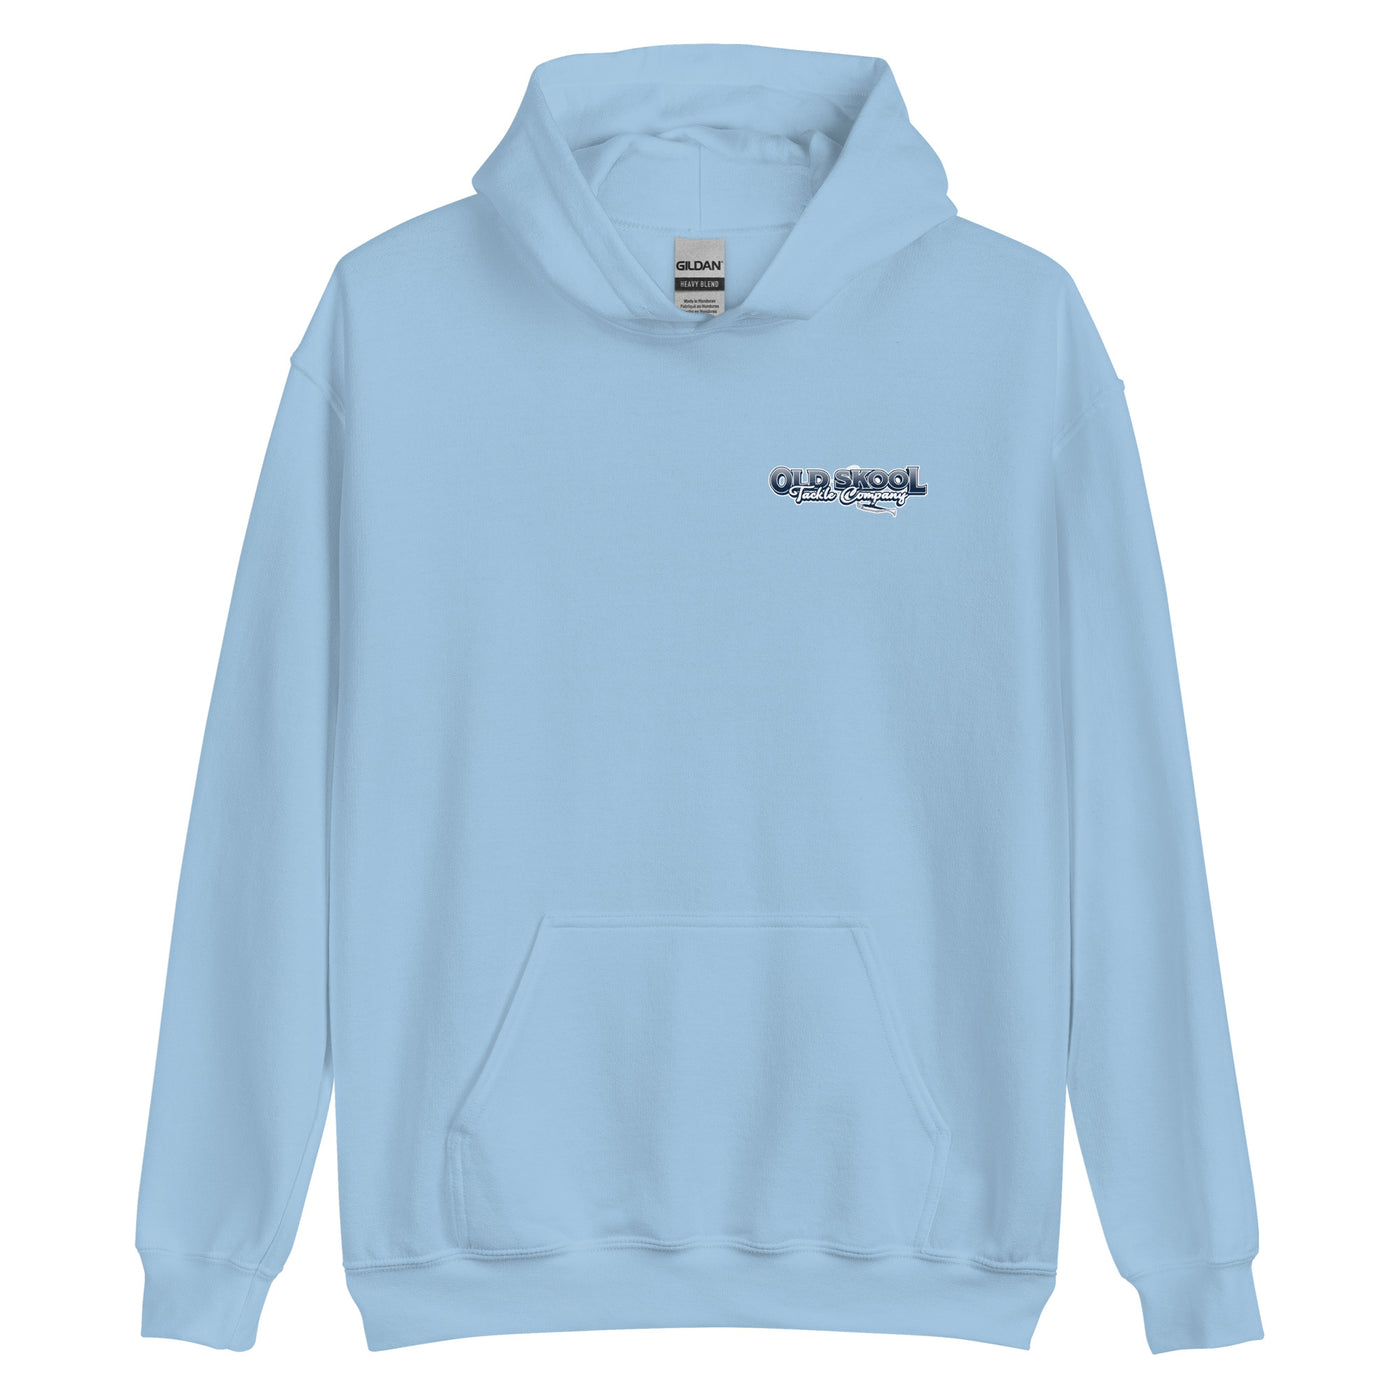 Unisex Hoodie - Tangier Approved